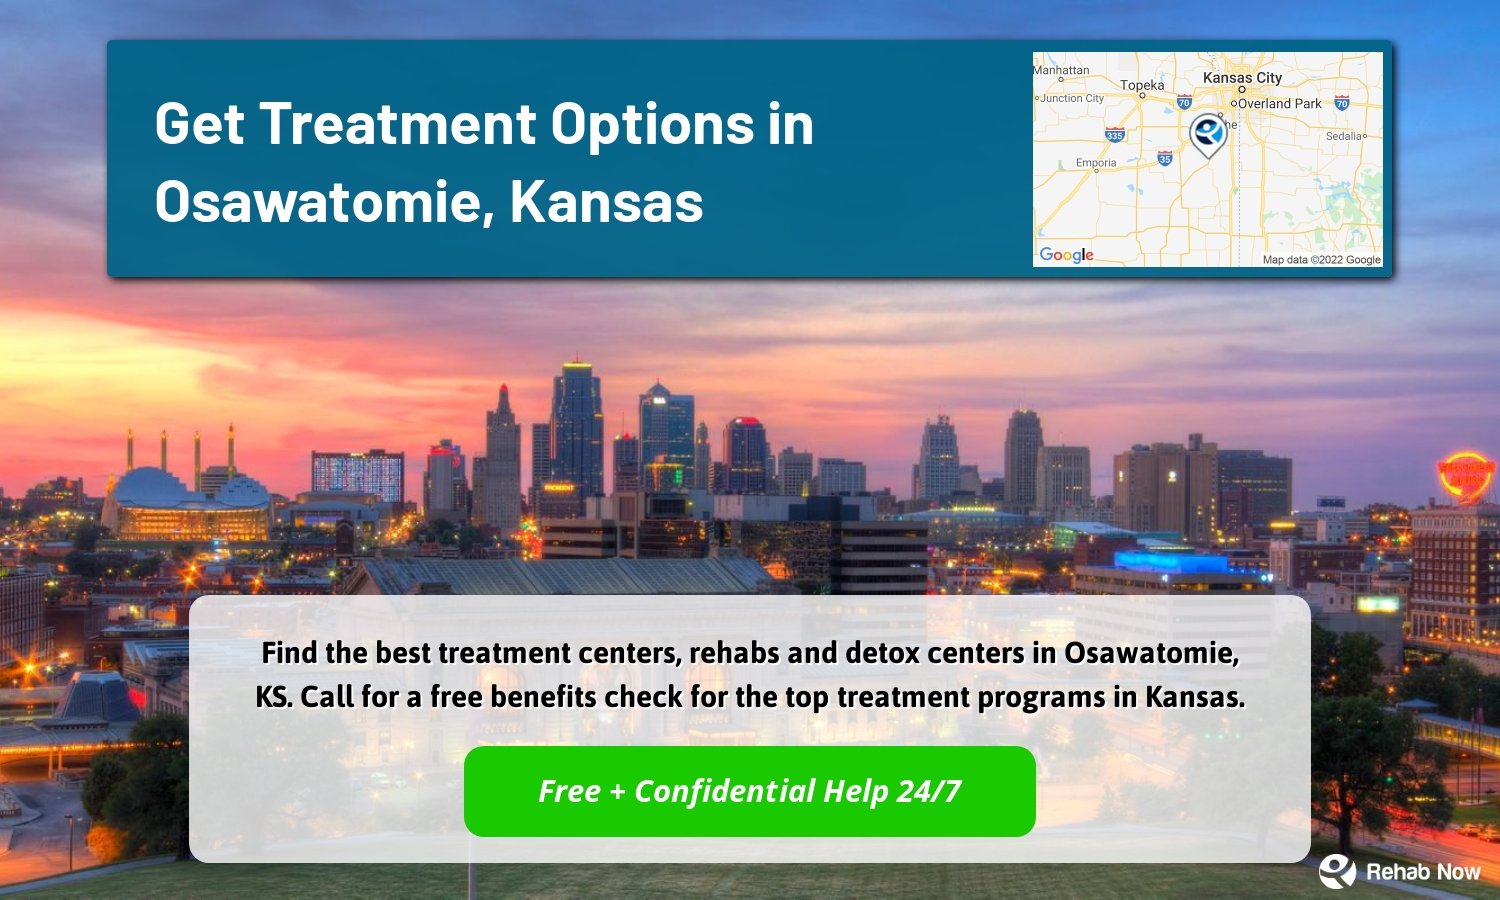 Find the best treatment centers, rehabs and detox centers in Osawatomie, KS. Call for a free benefits check for the top treatment programs in Kansas.